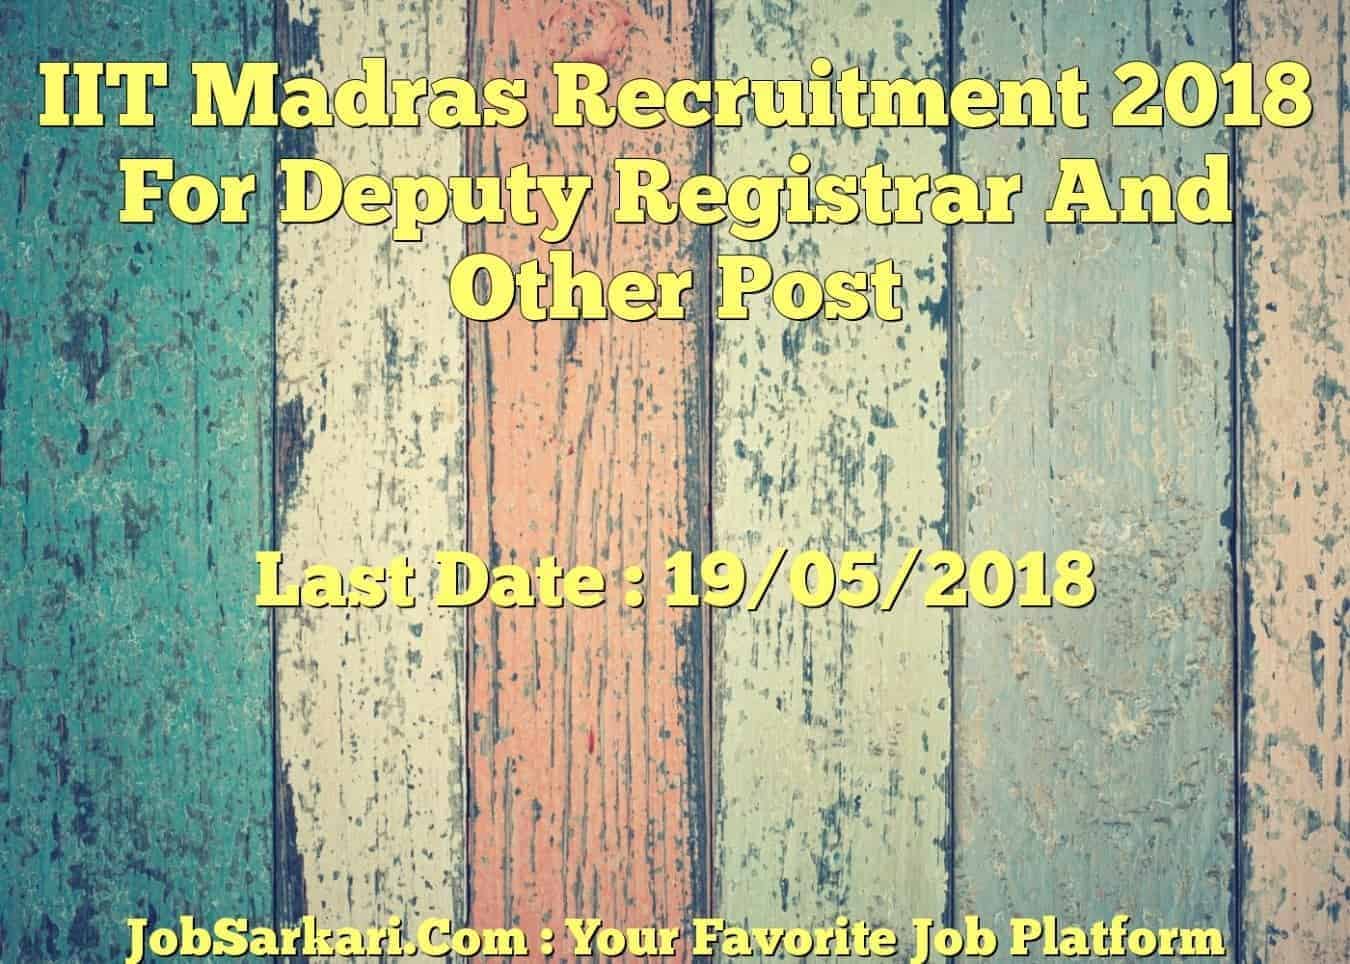 IIT Madras Recruitment 2018 For Deputy Registrar And Other Post